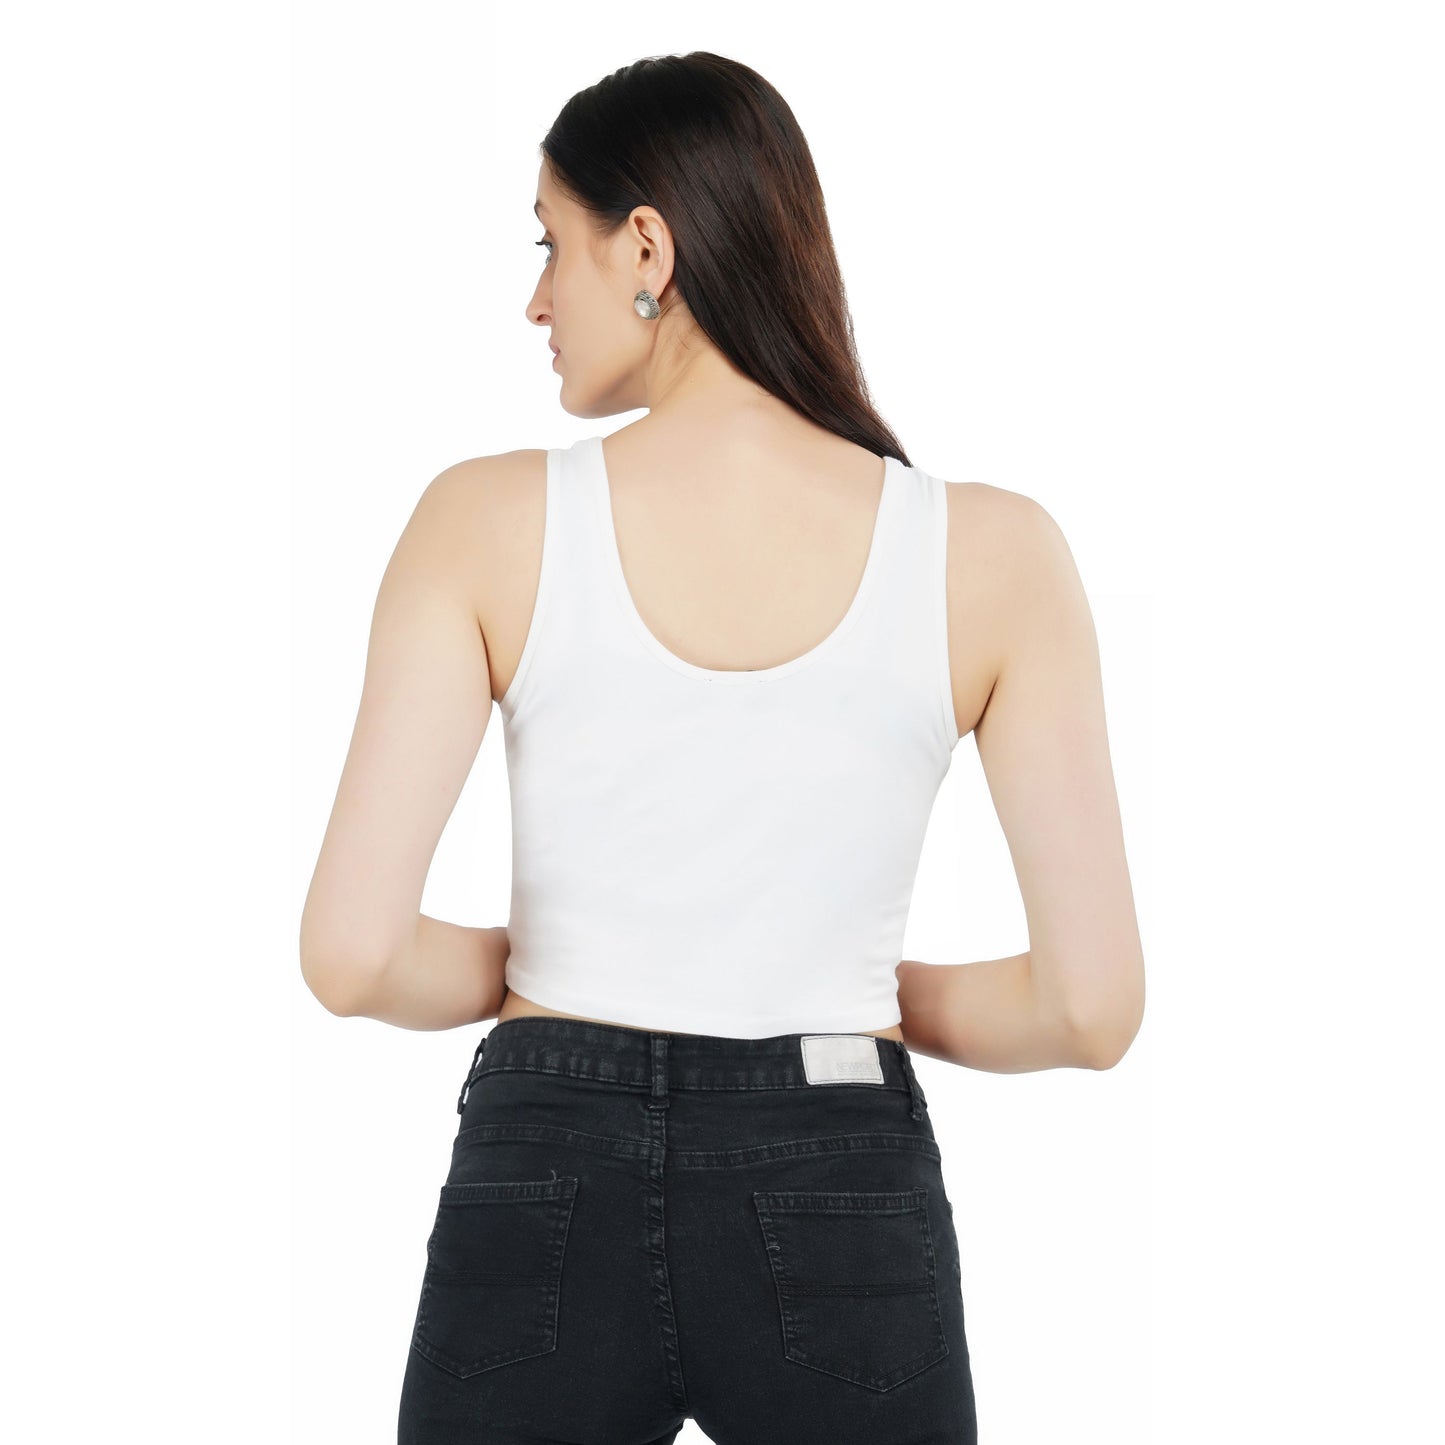 SLAY. Classic Women's Printed White Crop Top-clothing-to-slay.myshopify.com-Top